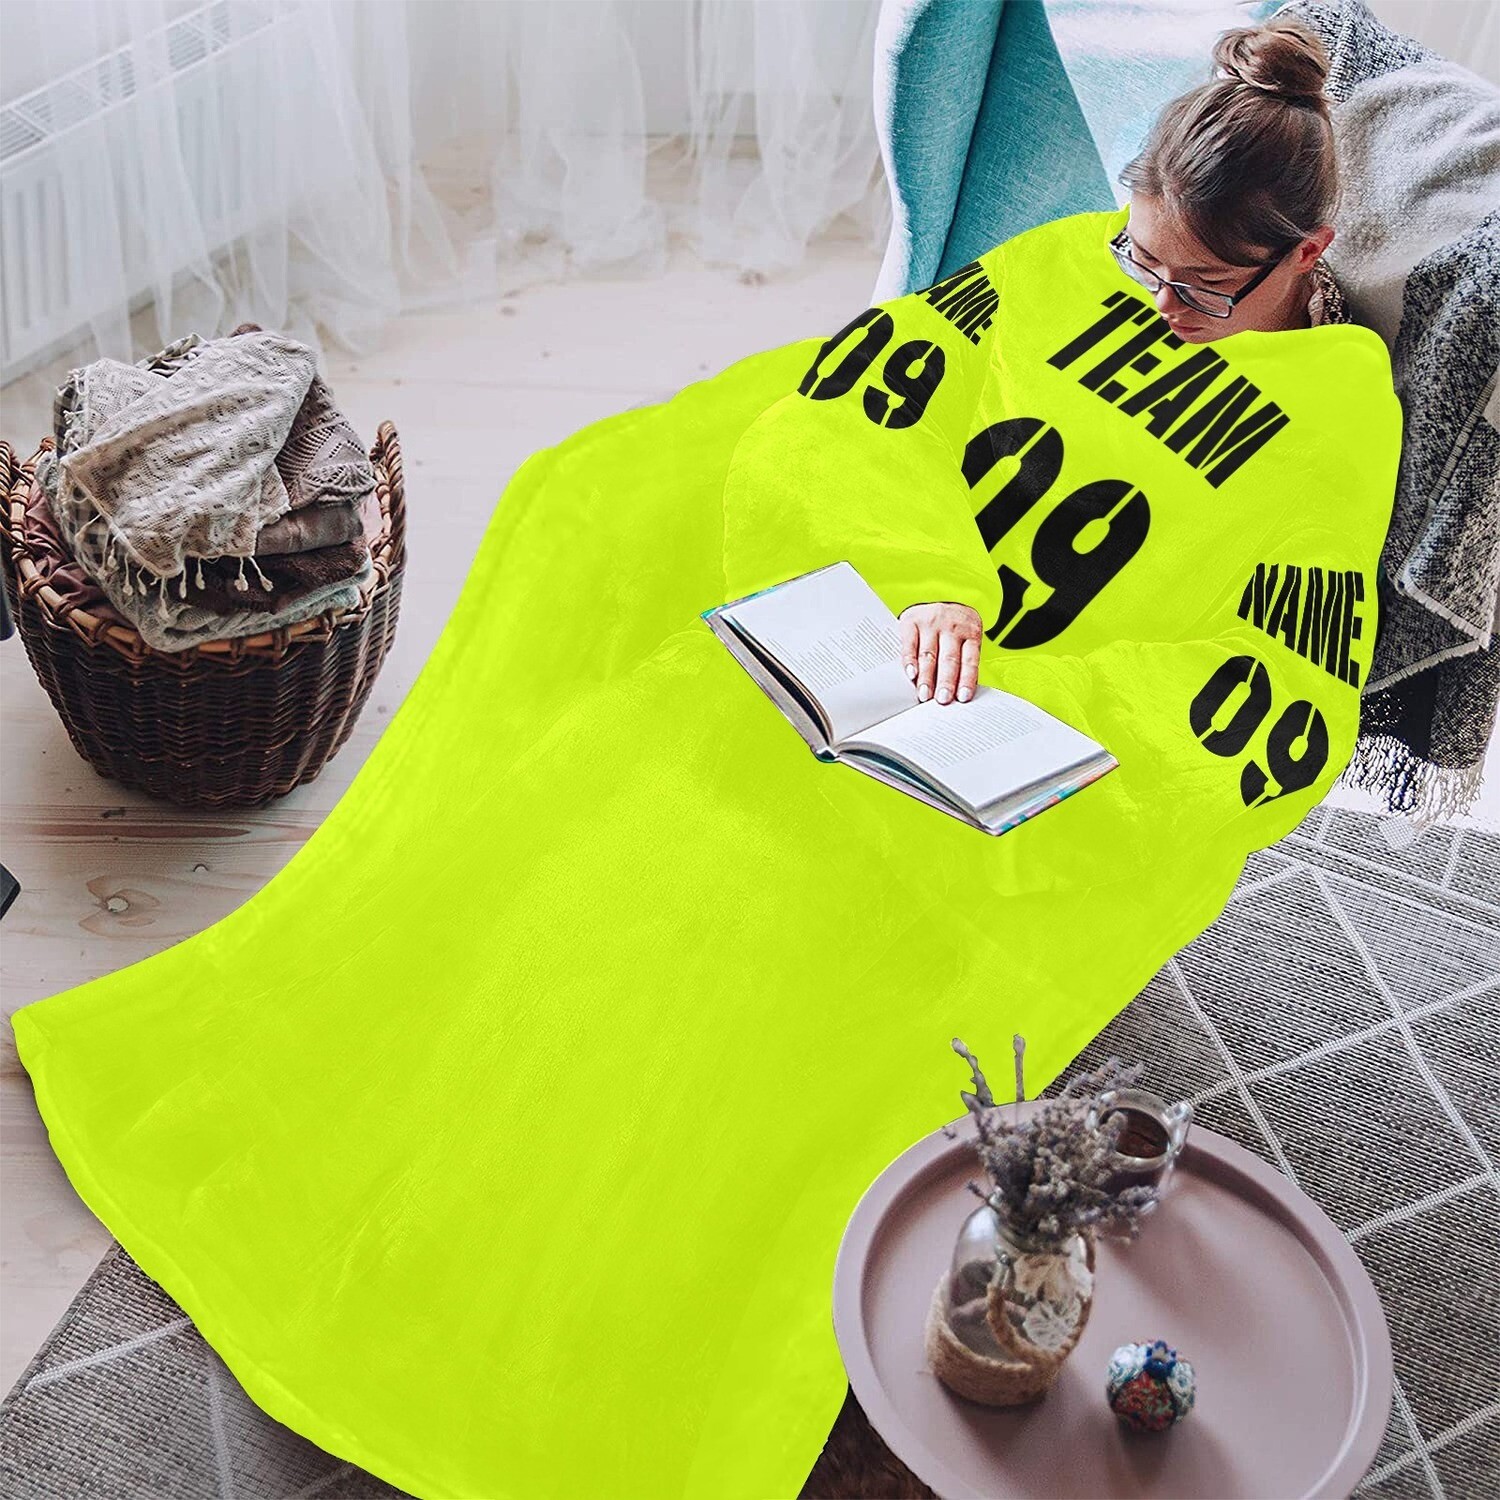 🤴🏽👸🏽Custom Team Wearable Blanket for Adults, Sports uniform, Personalized Blanket with sleeves, custom design your own Blanket, add team, name, gift, 68.9"x52.7" / 175 cm x 133.86 cm